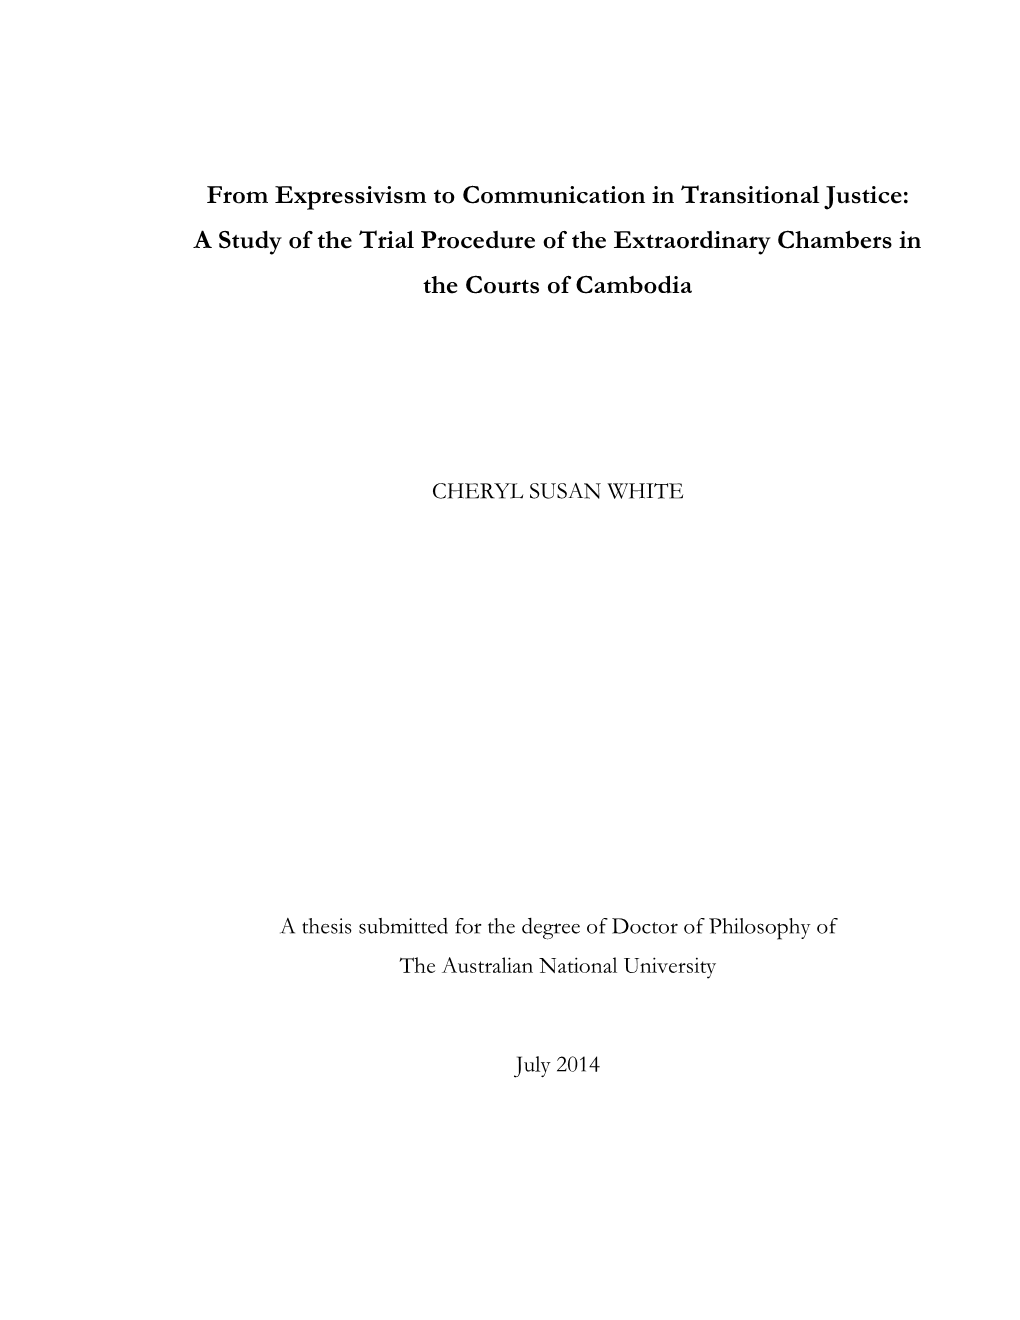 From Expressivism to Communication in Transitional Justice: a Study of the Trial Procedure of the Extraordinary Chambers in the Courts of Cambodia